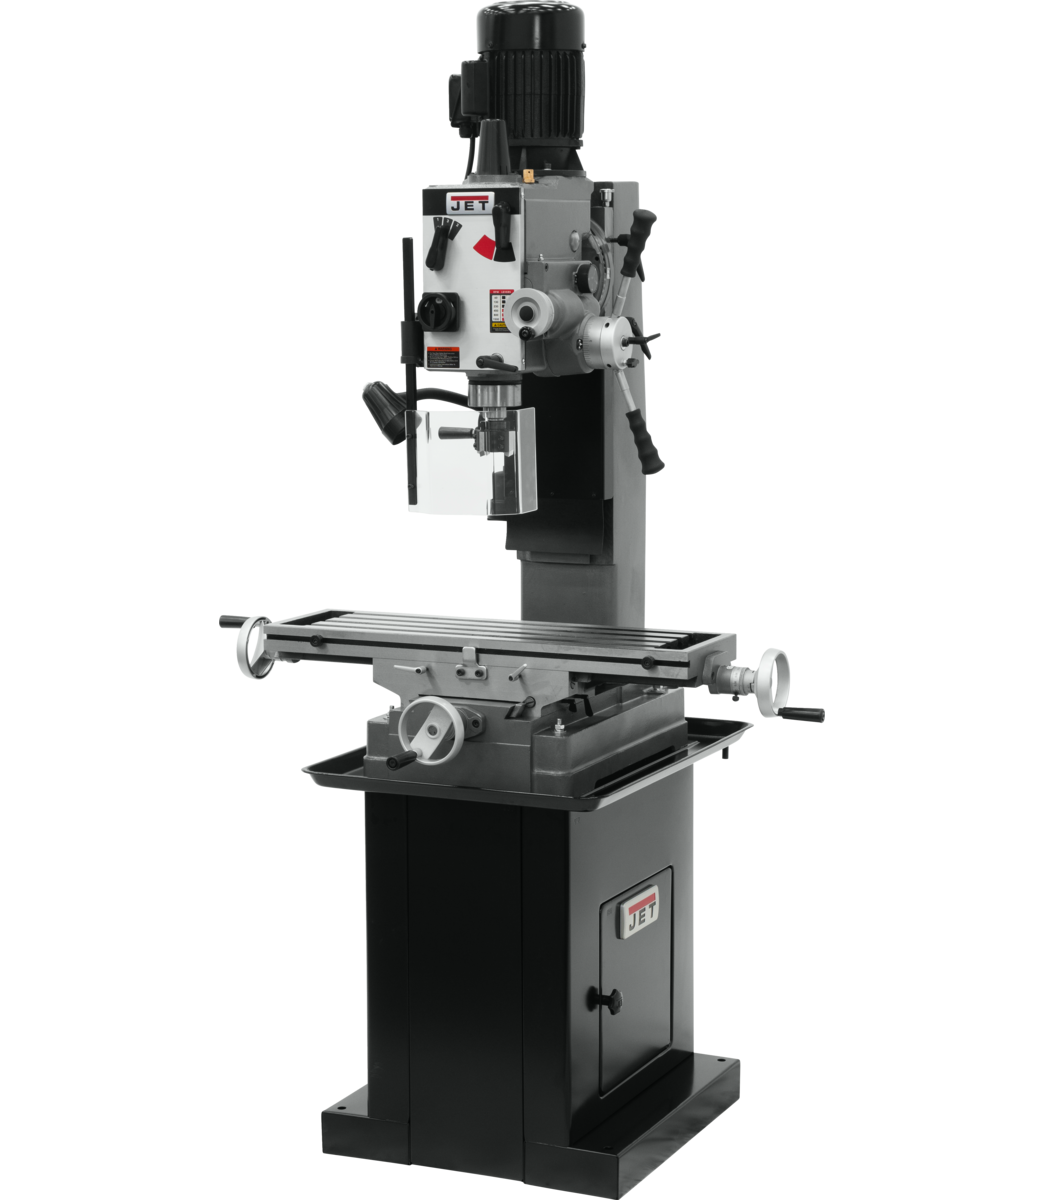 JMD-45GHPF Geared Head Square Column Mill Drill with Power Downfeed with DP700 2 Axis DRO & X-Axis Powerfeed